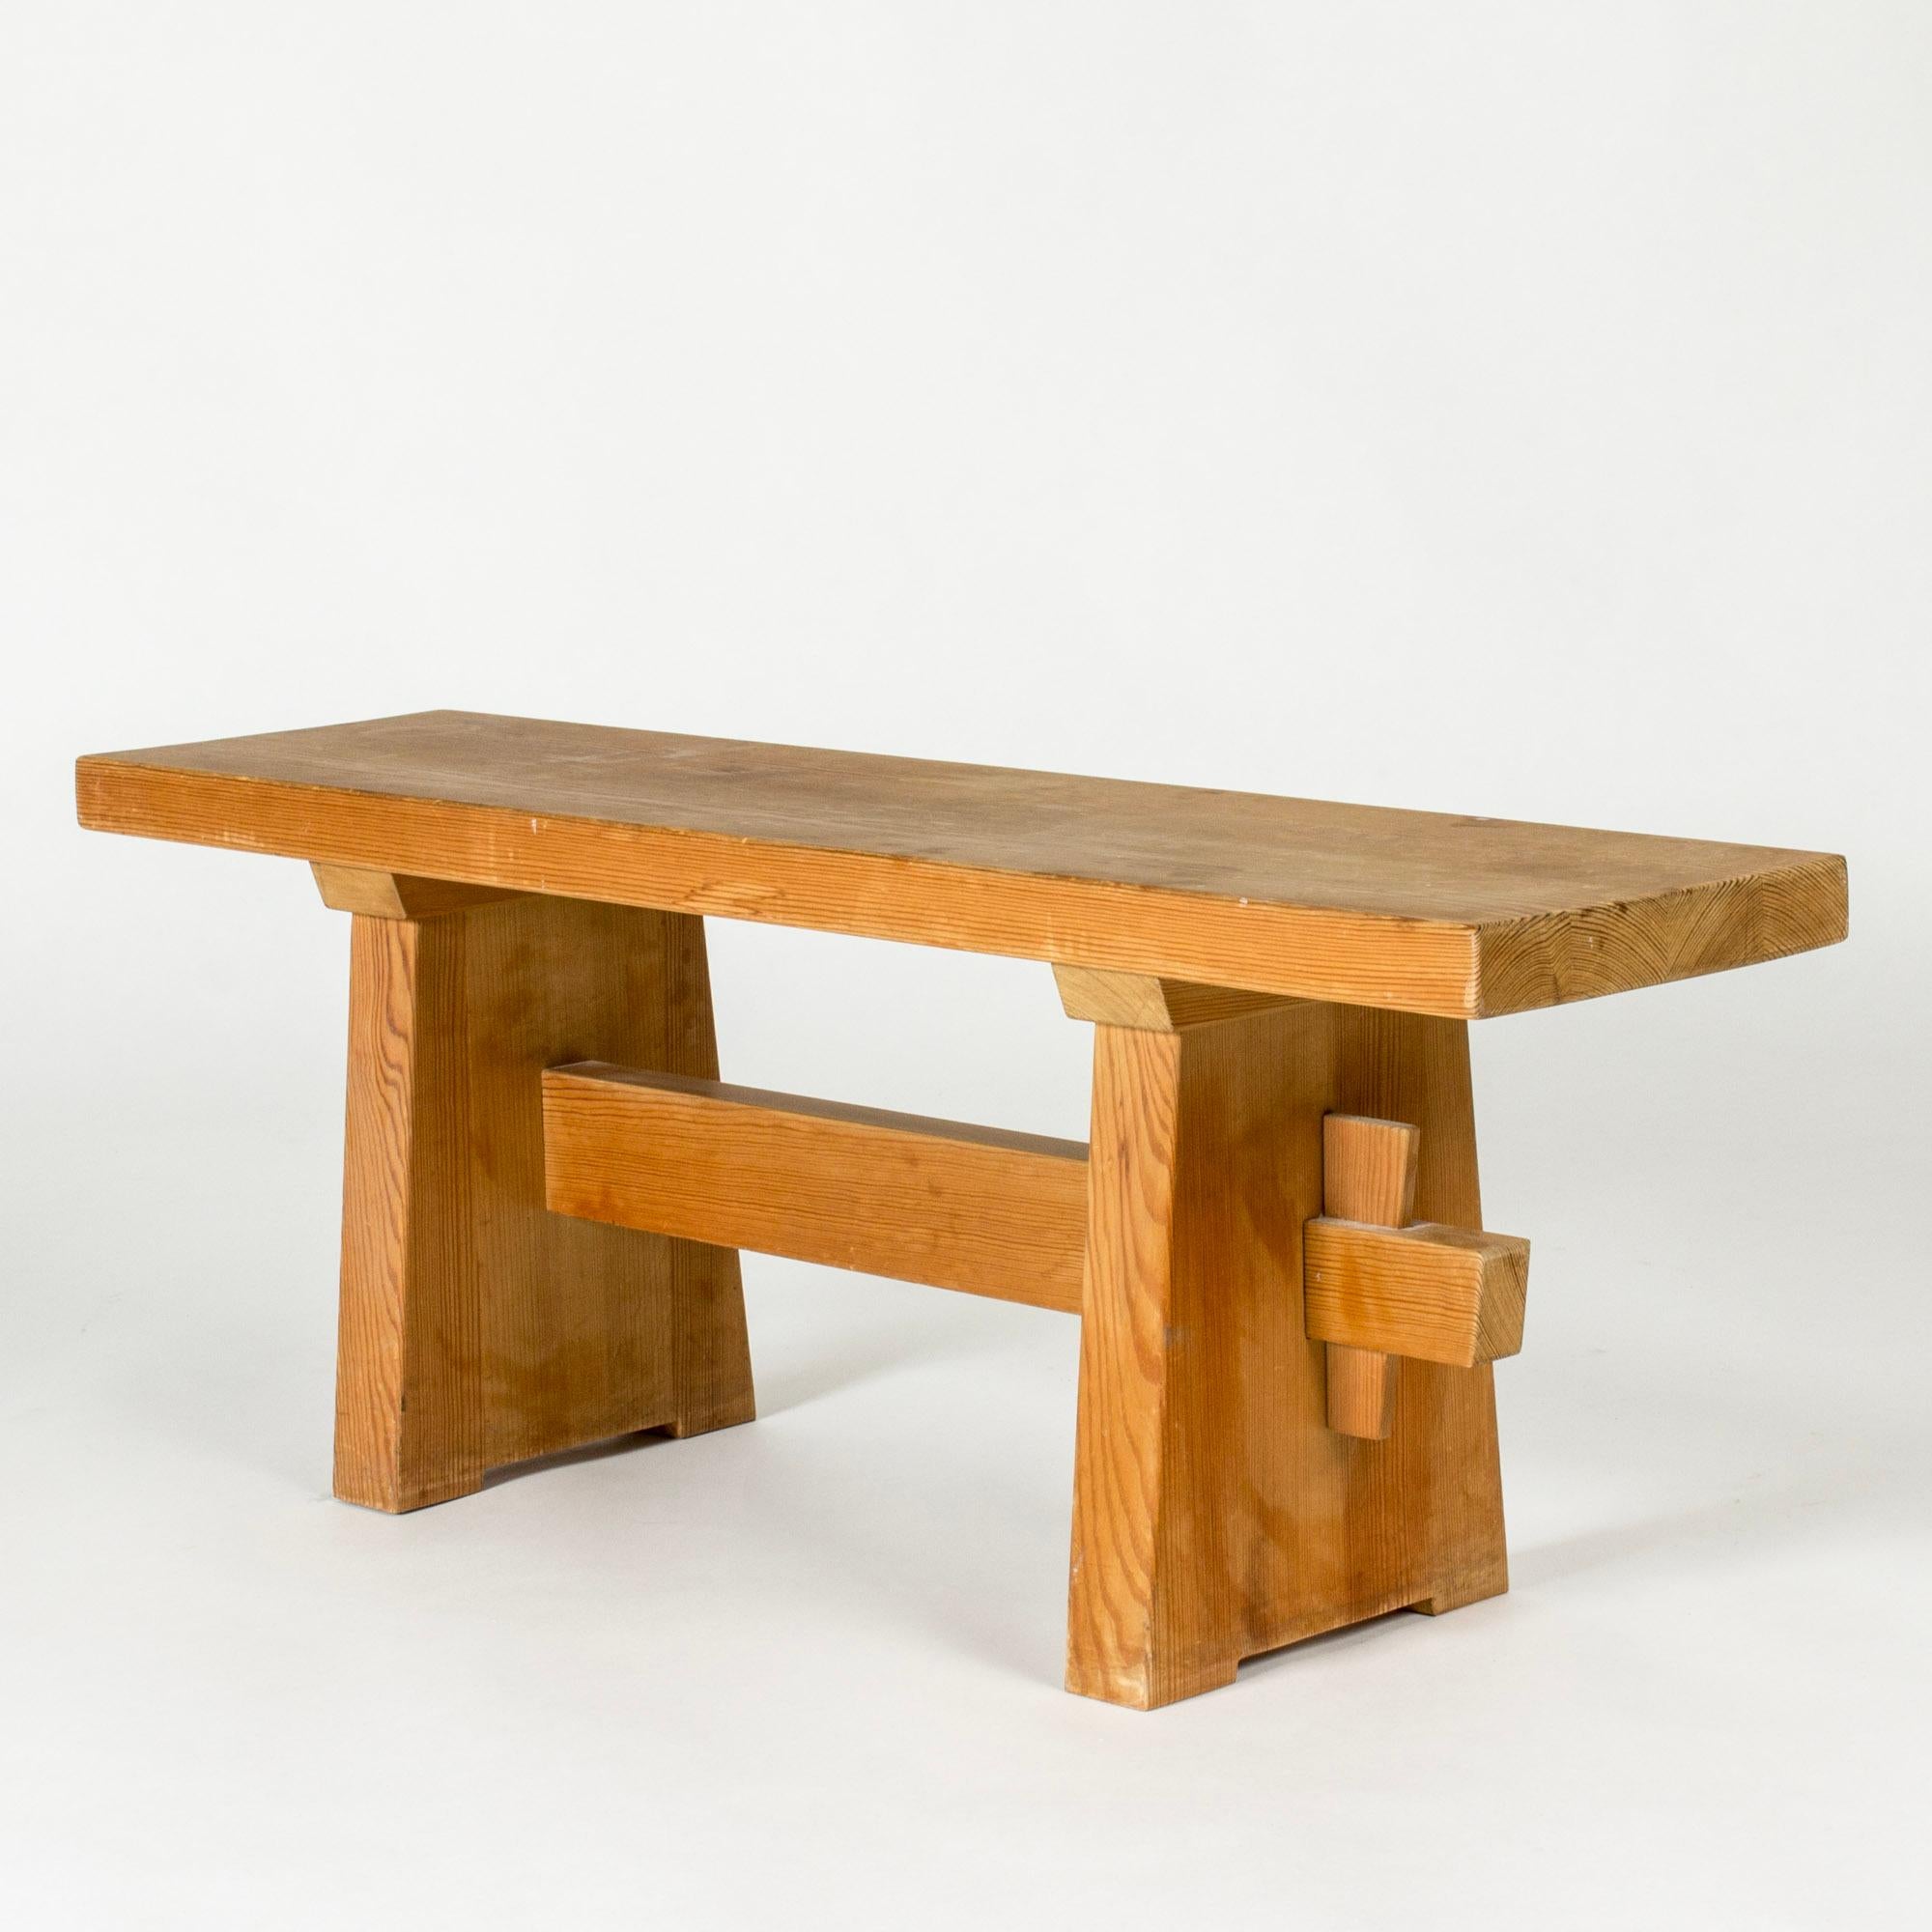 Cute Swedish midcentury pine bench in a compact design with nice lines.